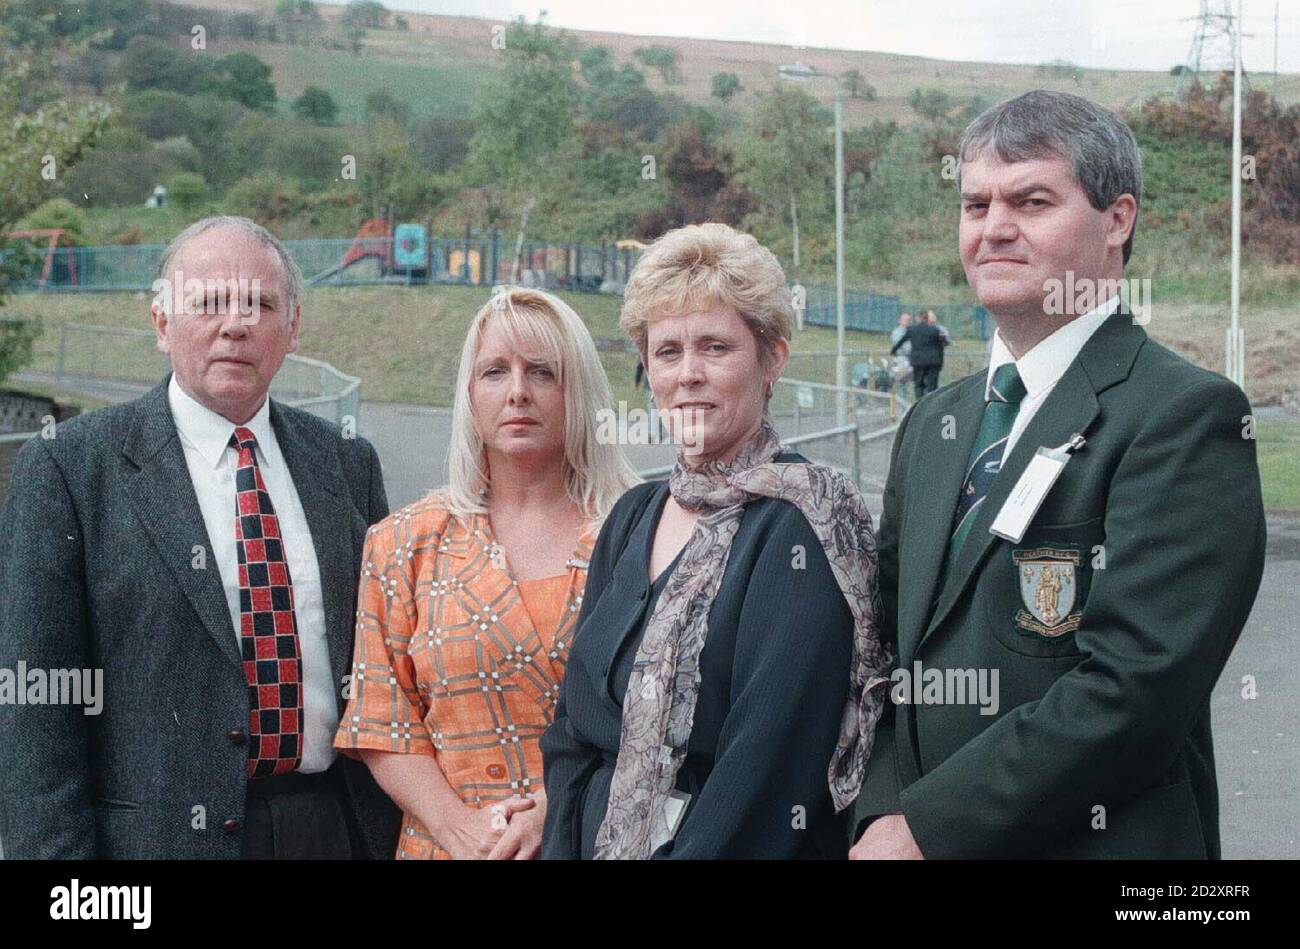 (L to R) Mr Howell Jones, a former teacher at the village school in Aberfan, with ex-pupils Gaynor Madgwick, Janett Smart and Gareth Jones, who all survived the disaster on October 21, 1966, when an avalanche of coal waste engulfed the school. Survivors of the tragedy joined bereaved parents  today (Friday) as the Queen visited the site, now a tranquil memorial garden, where she planted a tree in remembrance of those who died. See PA story ROYAL Aberfan. Photo by John Stillwell/PA Stock Photo